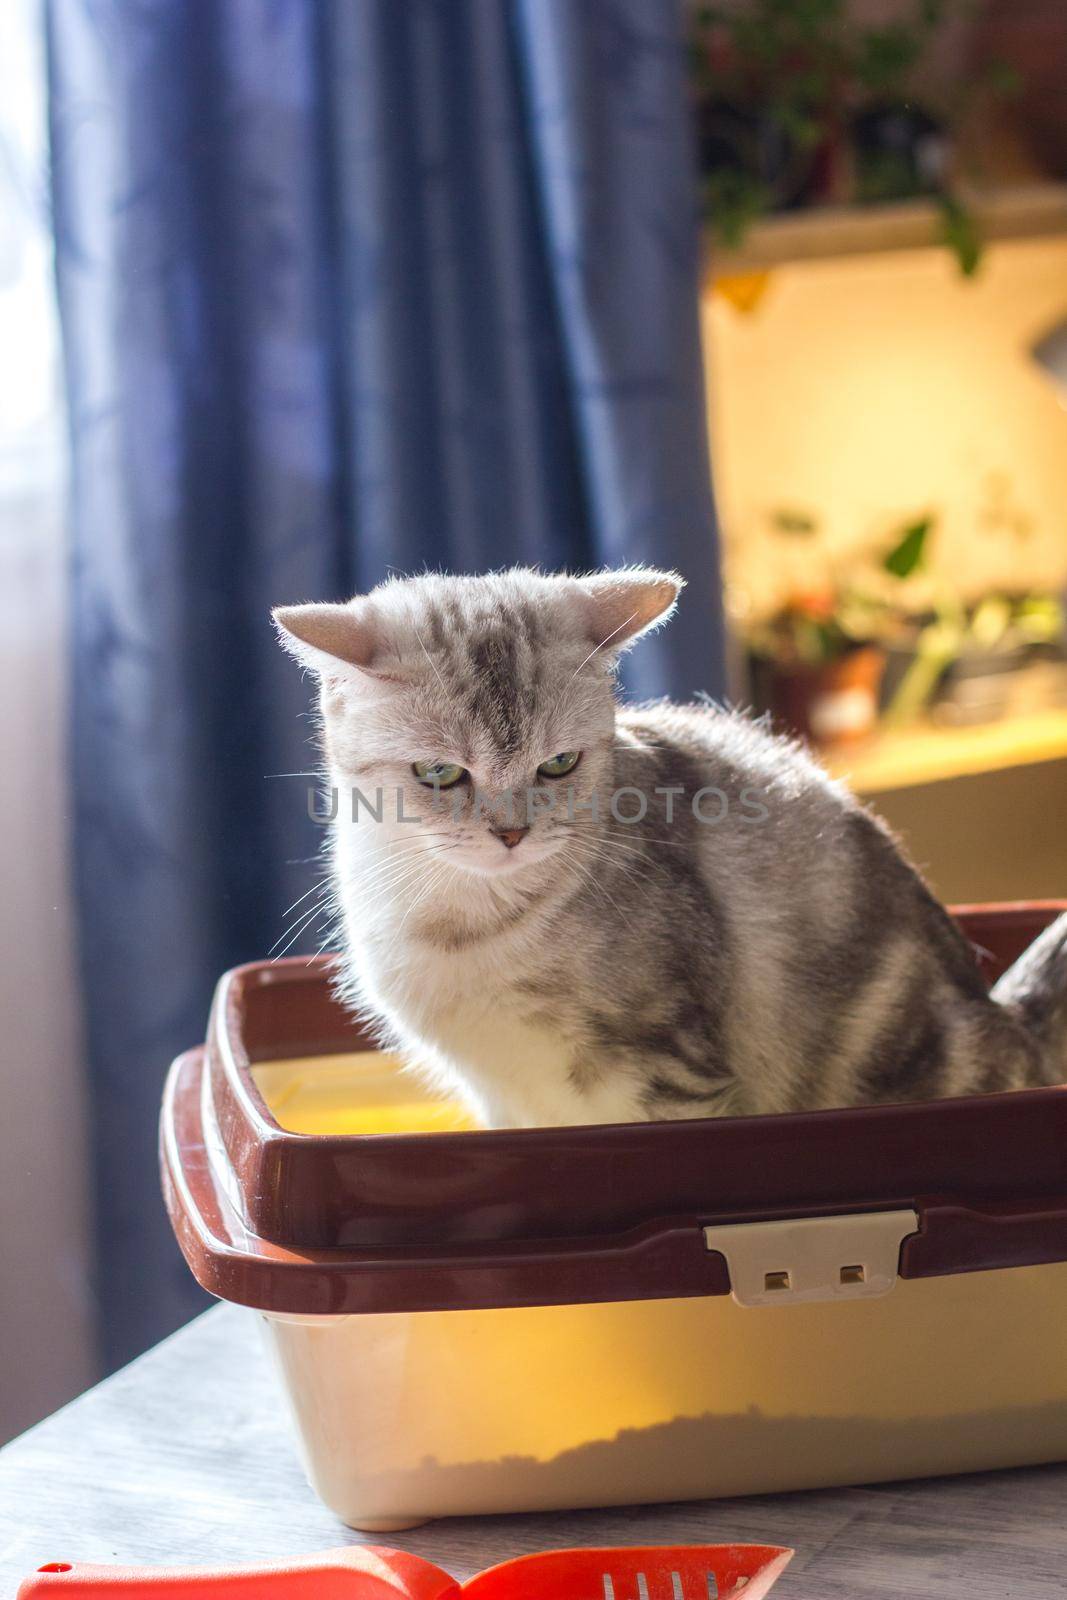 Cat sitting in a cat litter box or tray